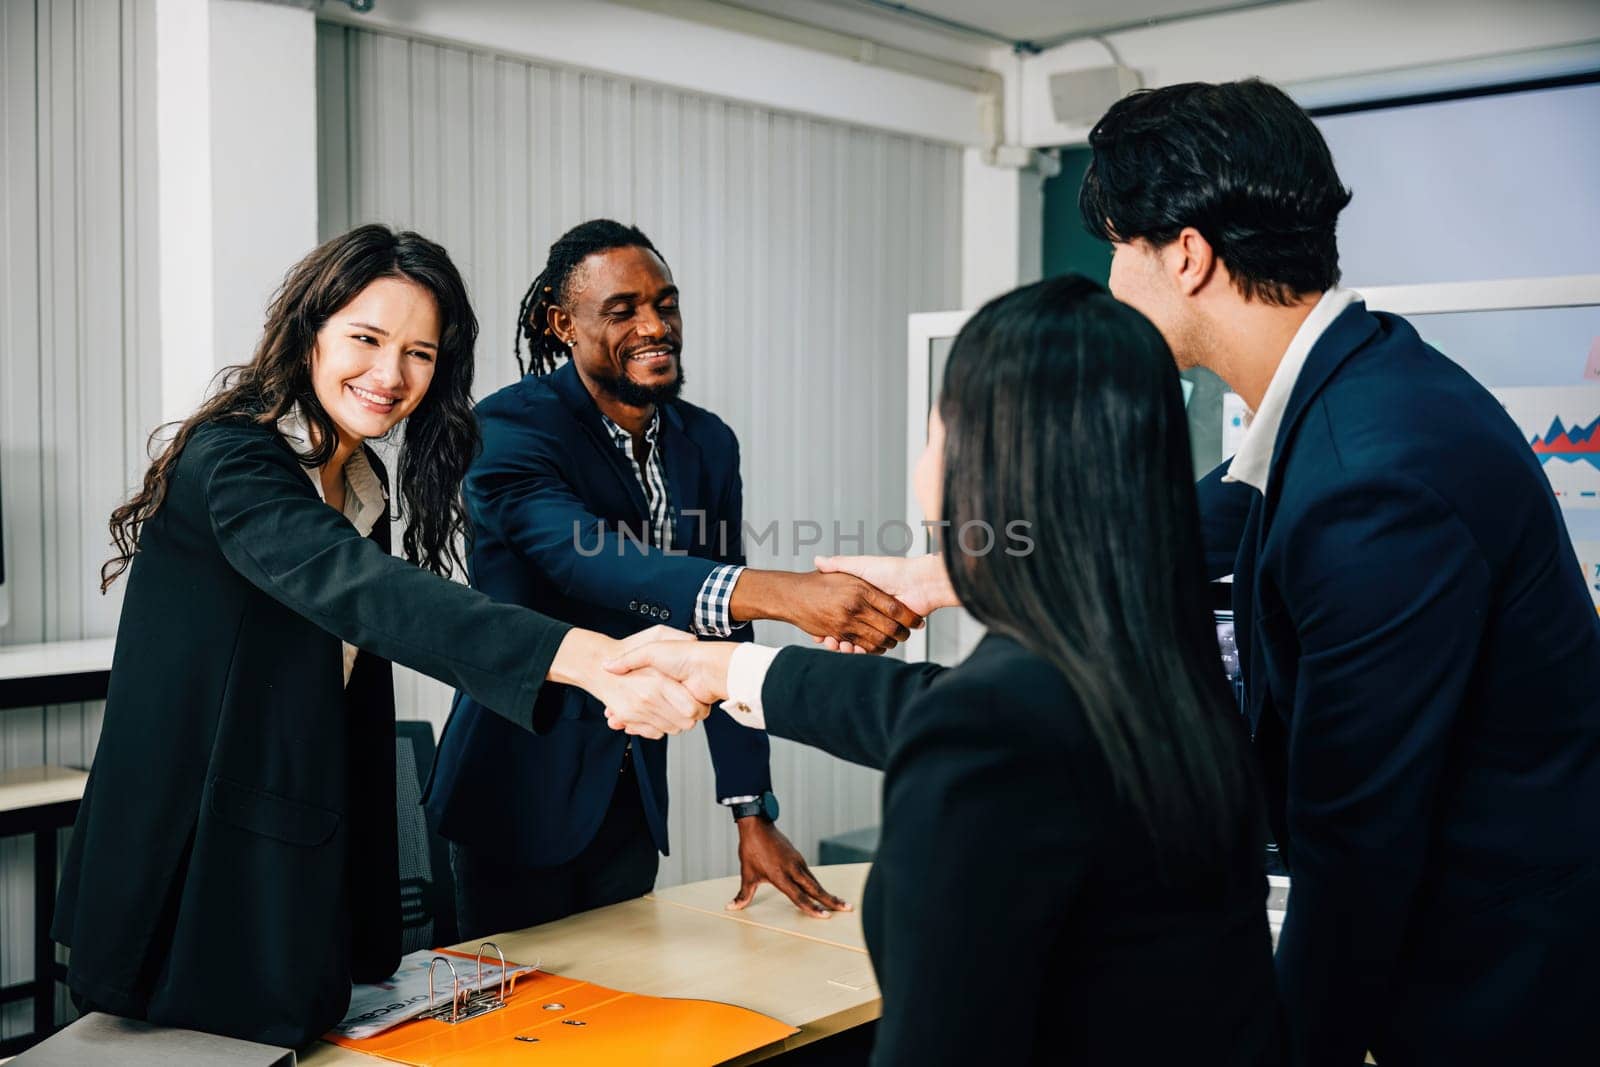 In an office, business people shake hands to celebrate an agreement. Colleagues, including marketing experts, successfully conclude a deal after a productive meeting. Teamwork